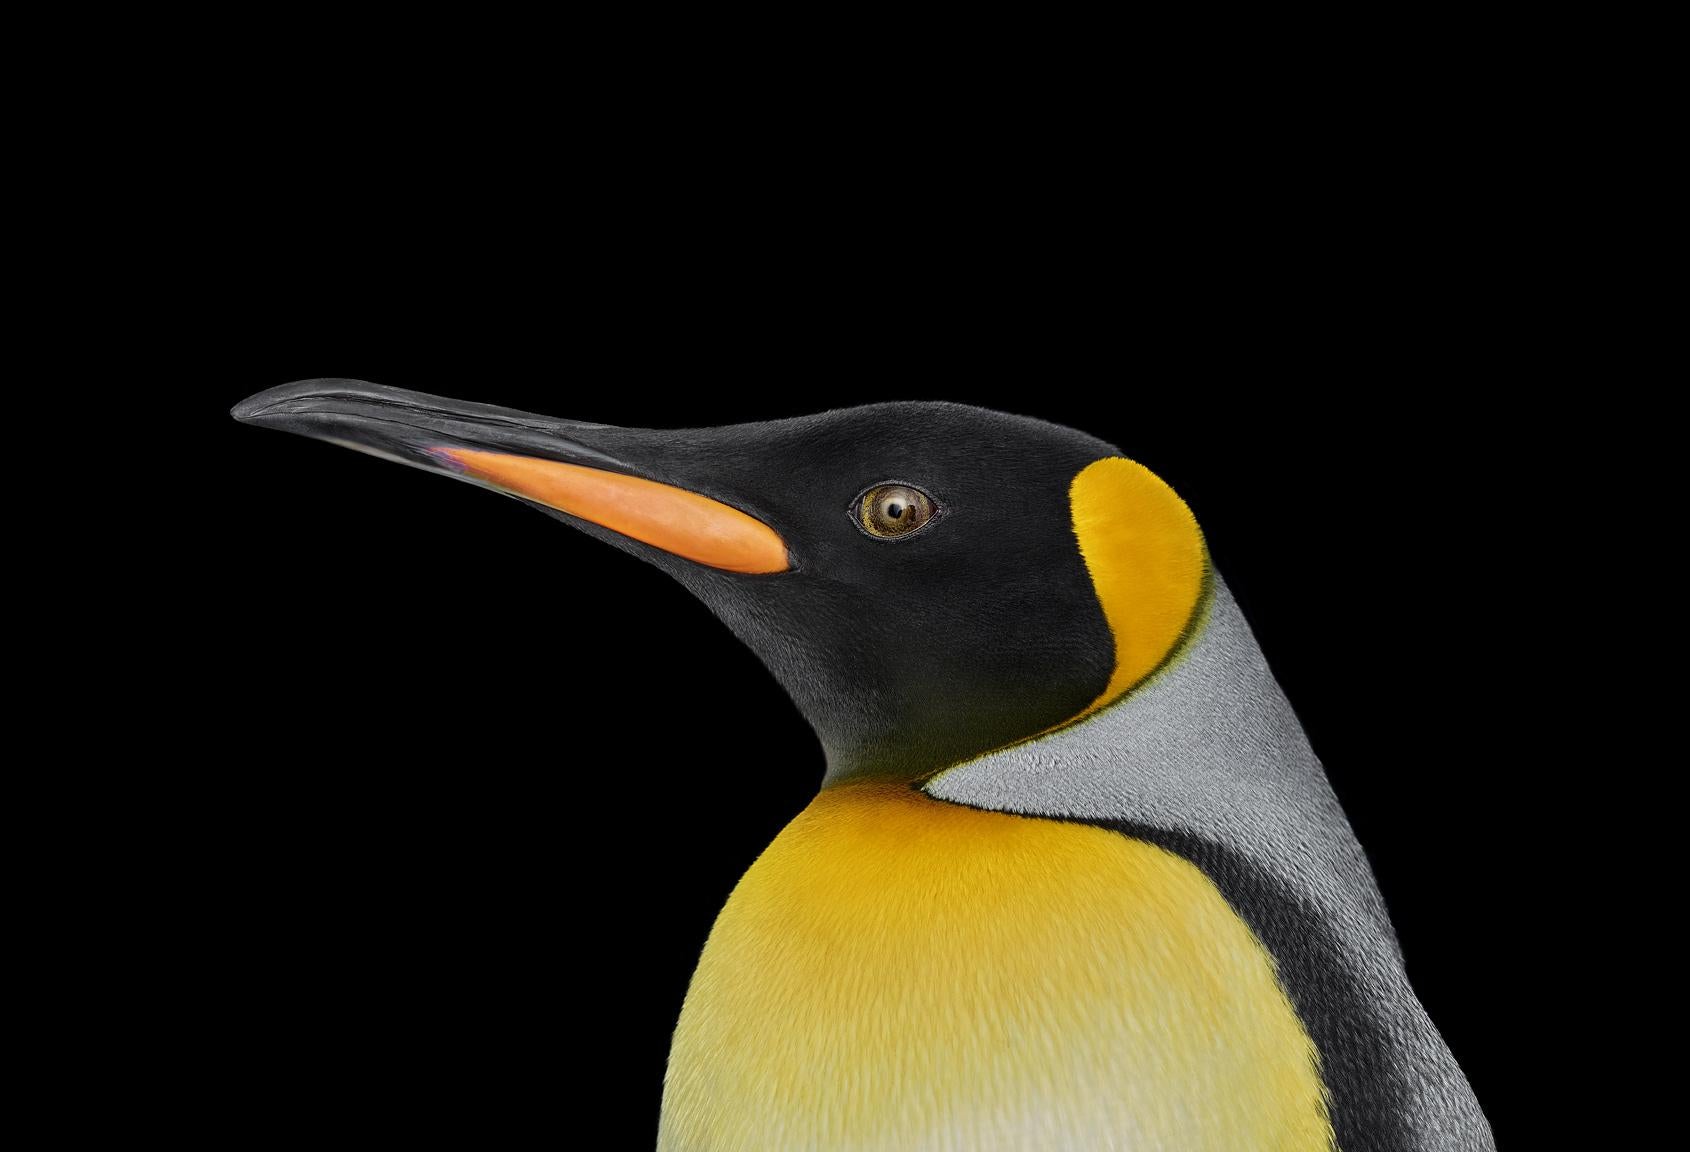 'King Penguin #1, Albuquerque, New Mexico, USA, 2019' is a limited-edition photograph by contemporary artist Brad Wilson from the ‘Affinity’ series which features studio portraits of wild animals. 

This photograph is sold unframed as a print only.